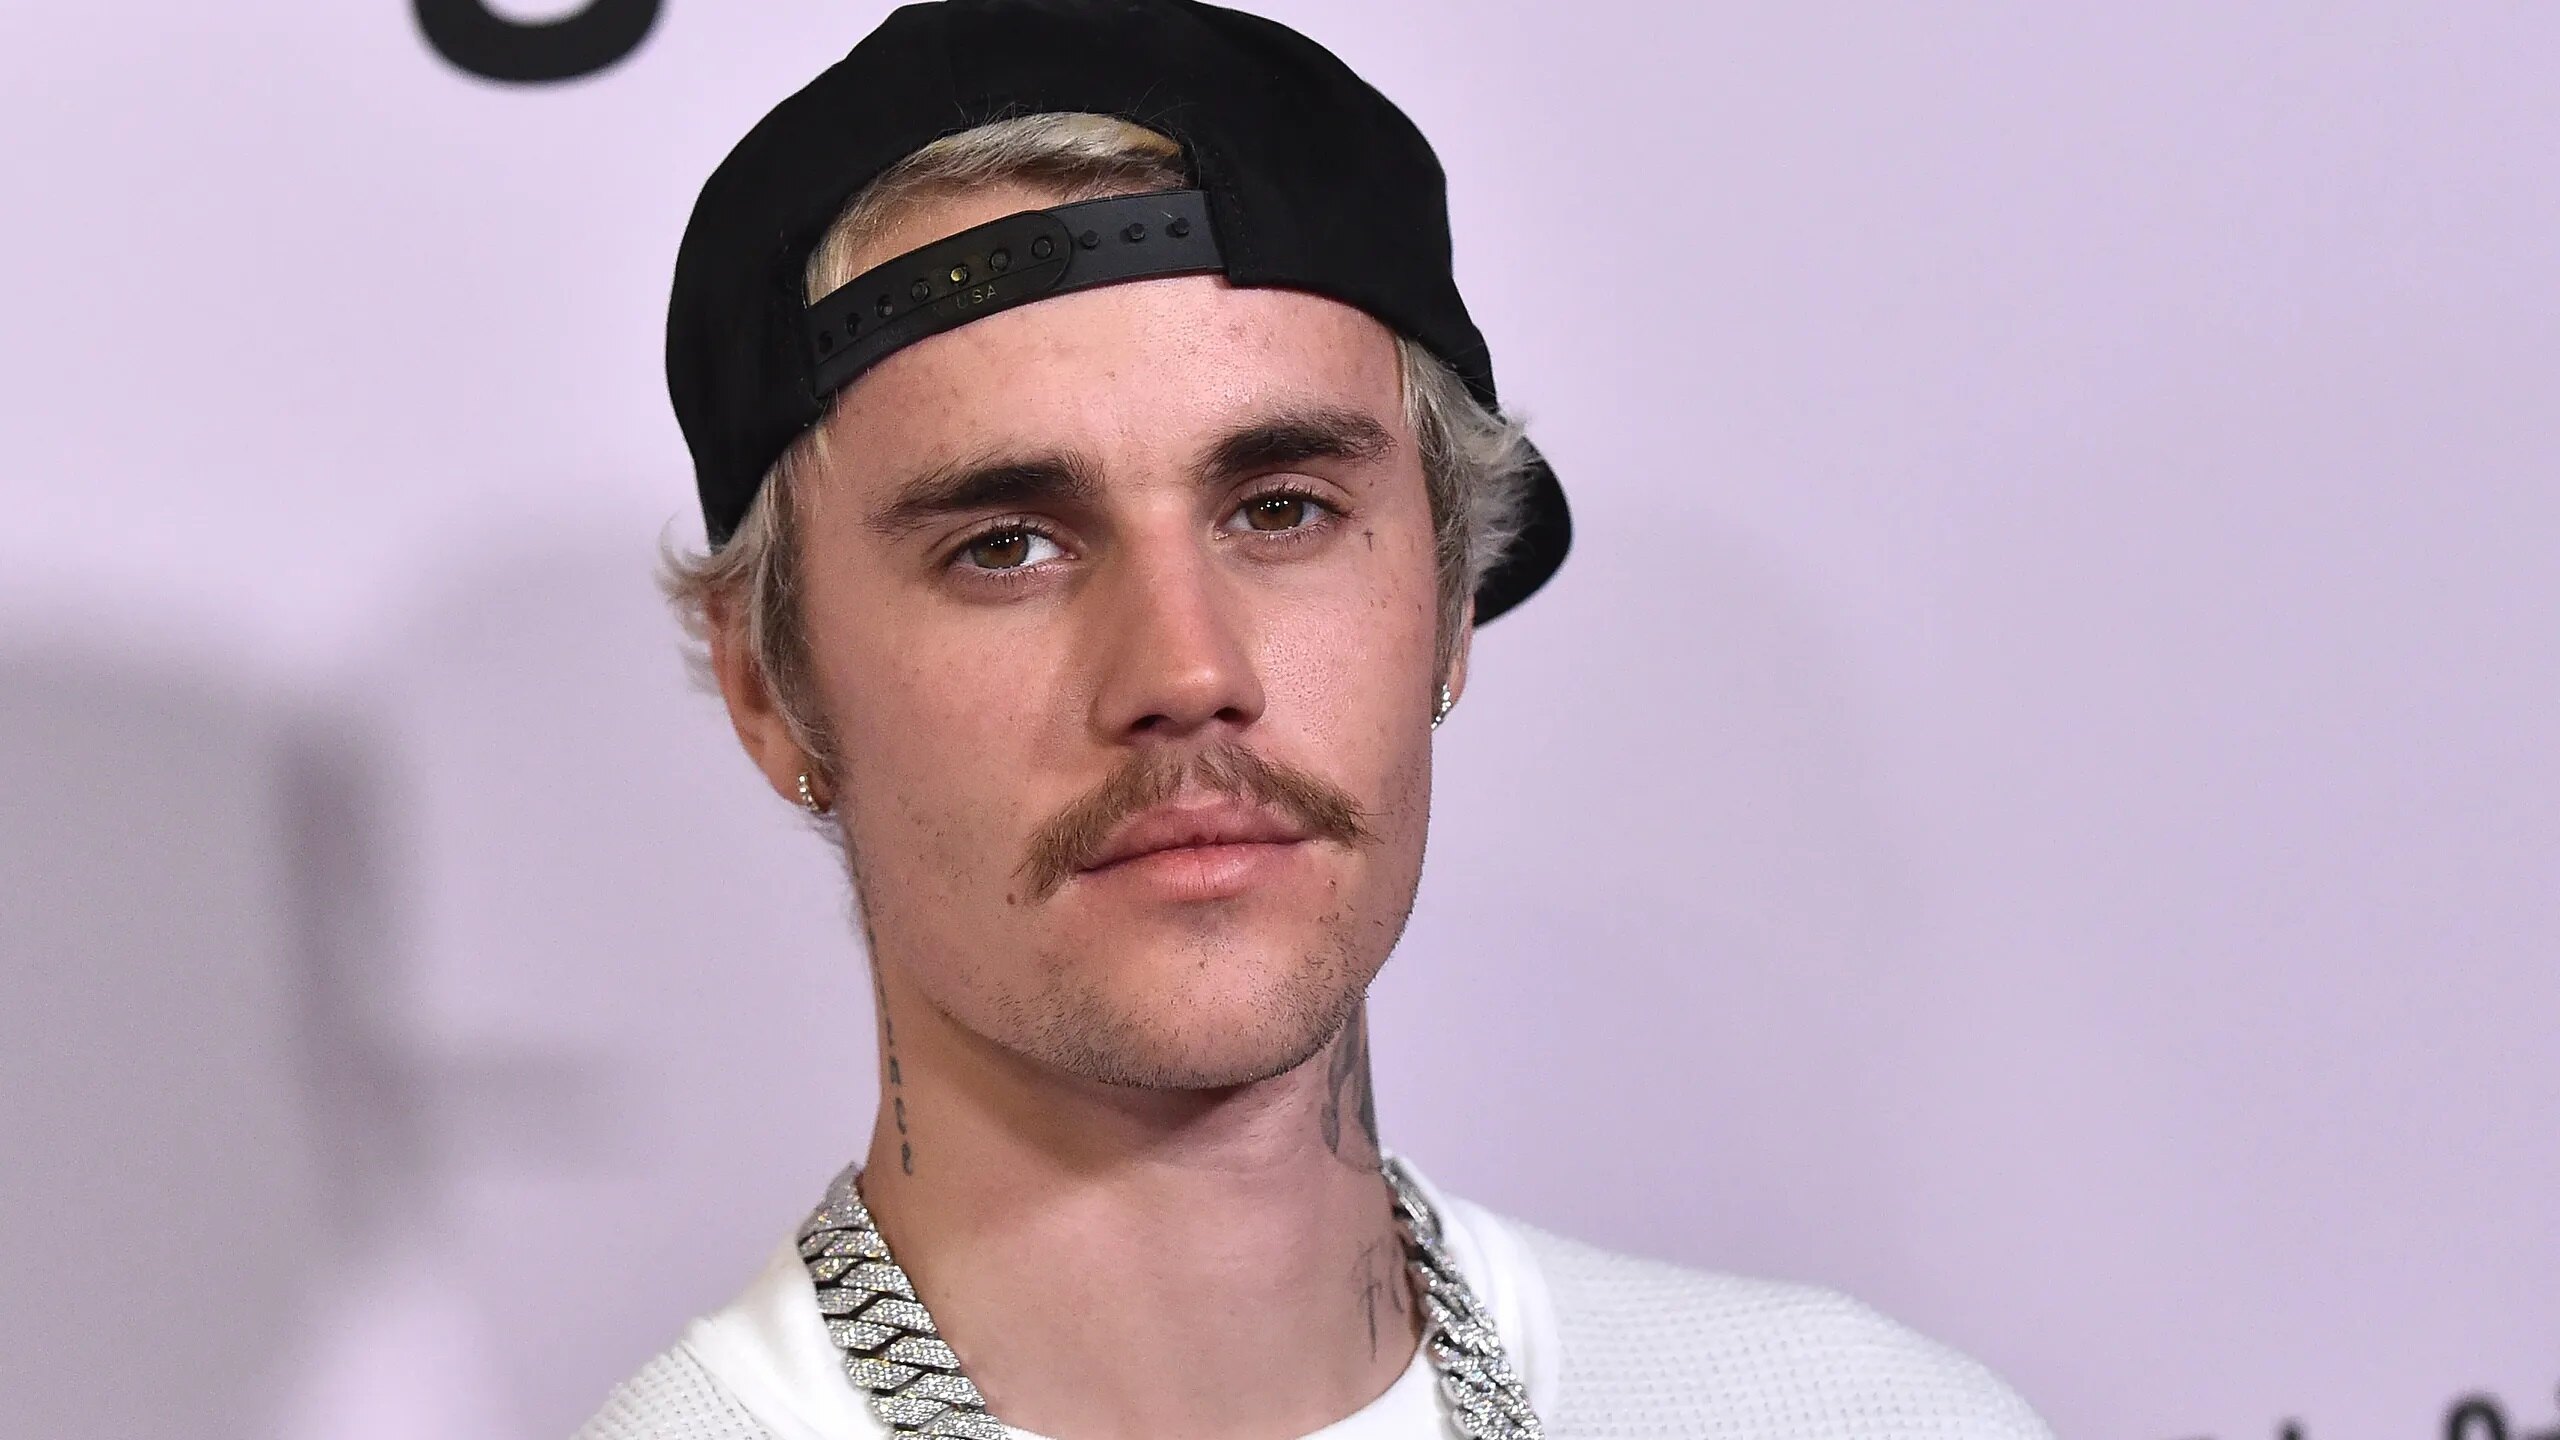 Justin Bieber Spotted With Pastor Judah Smith In Las Vegas Before Super Bowl